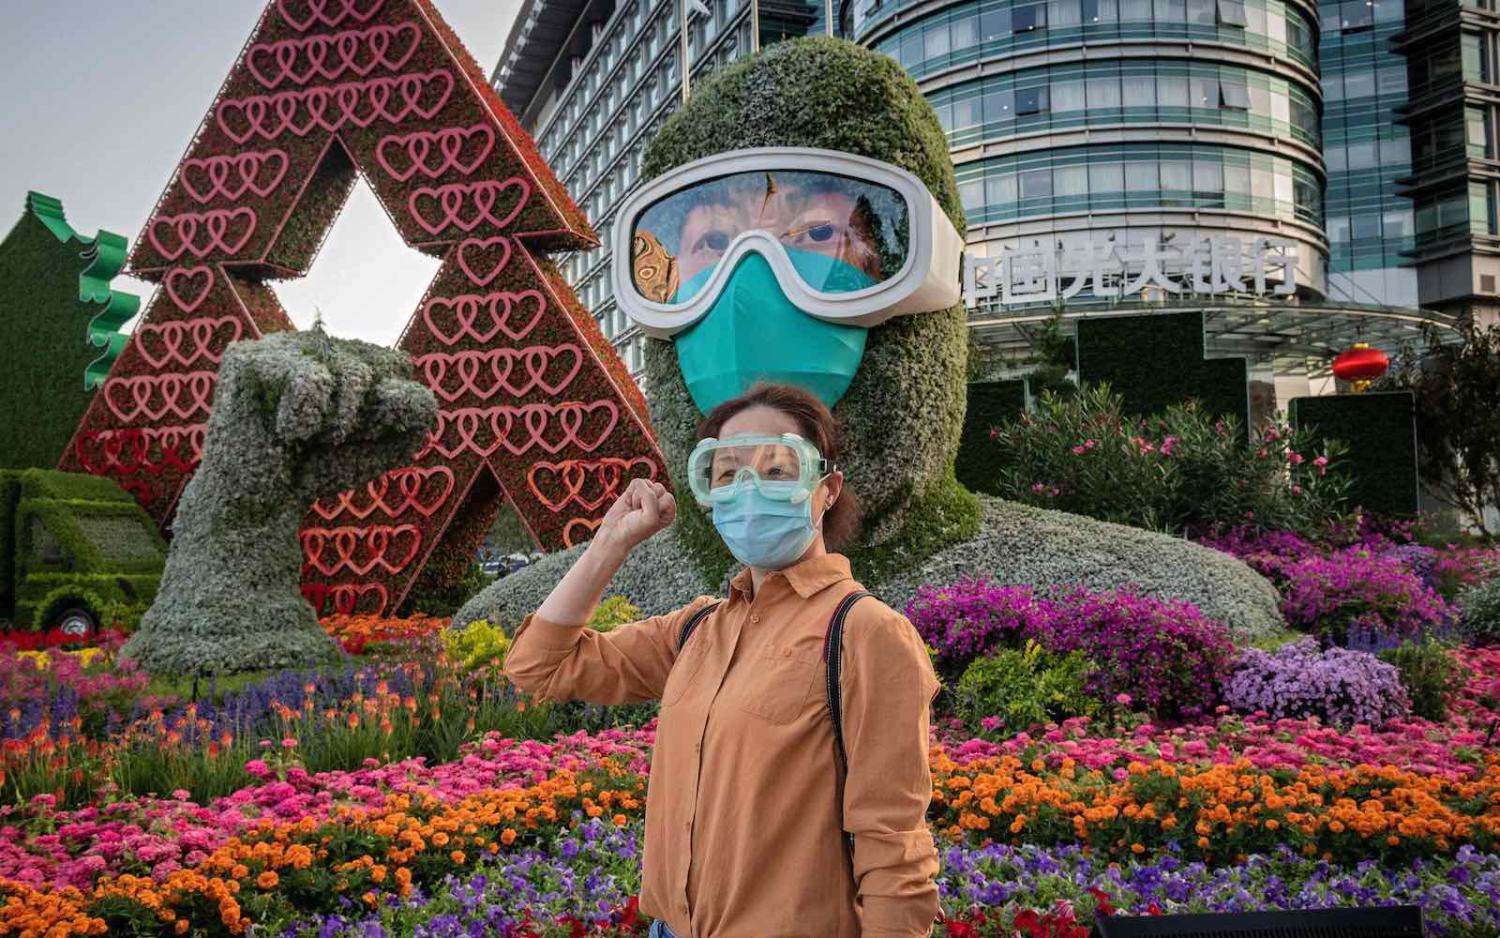 A woman poses in front of a flower display dedicated to frontline healthcare workers during the Covid-19 pandemic, Beijing, 29 September 2020 (Nicolas Asfouri/AFP via Getty Images)